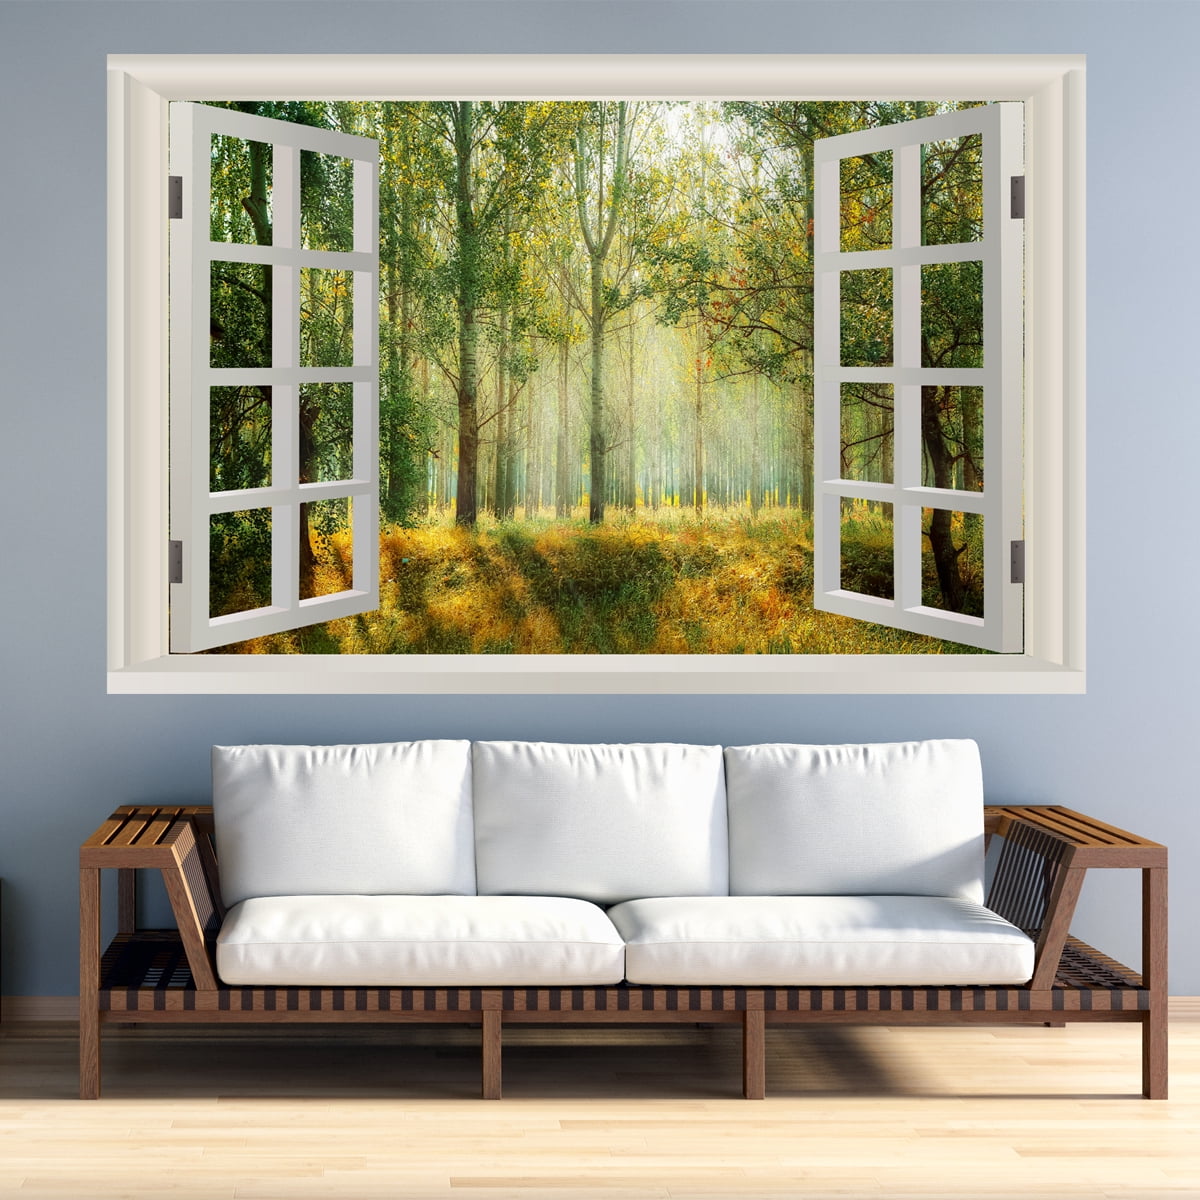 I518 Scenic Forest Tree Lake Green Window Wall Decal 3D Art Stickers Vinyl Room 